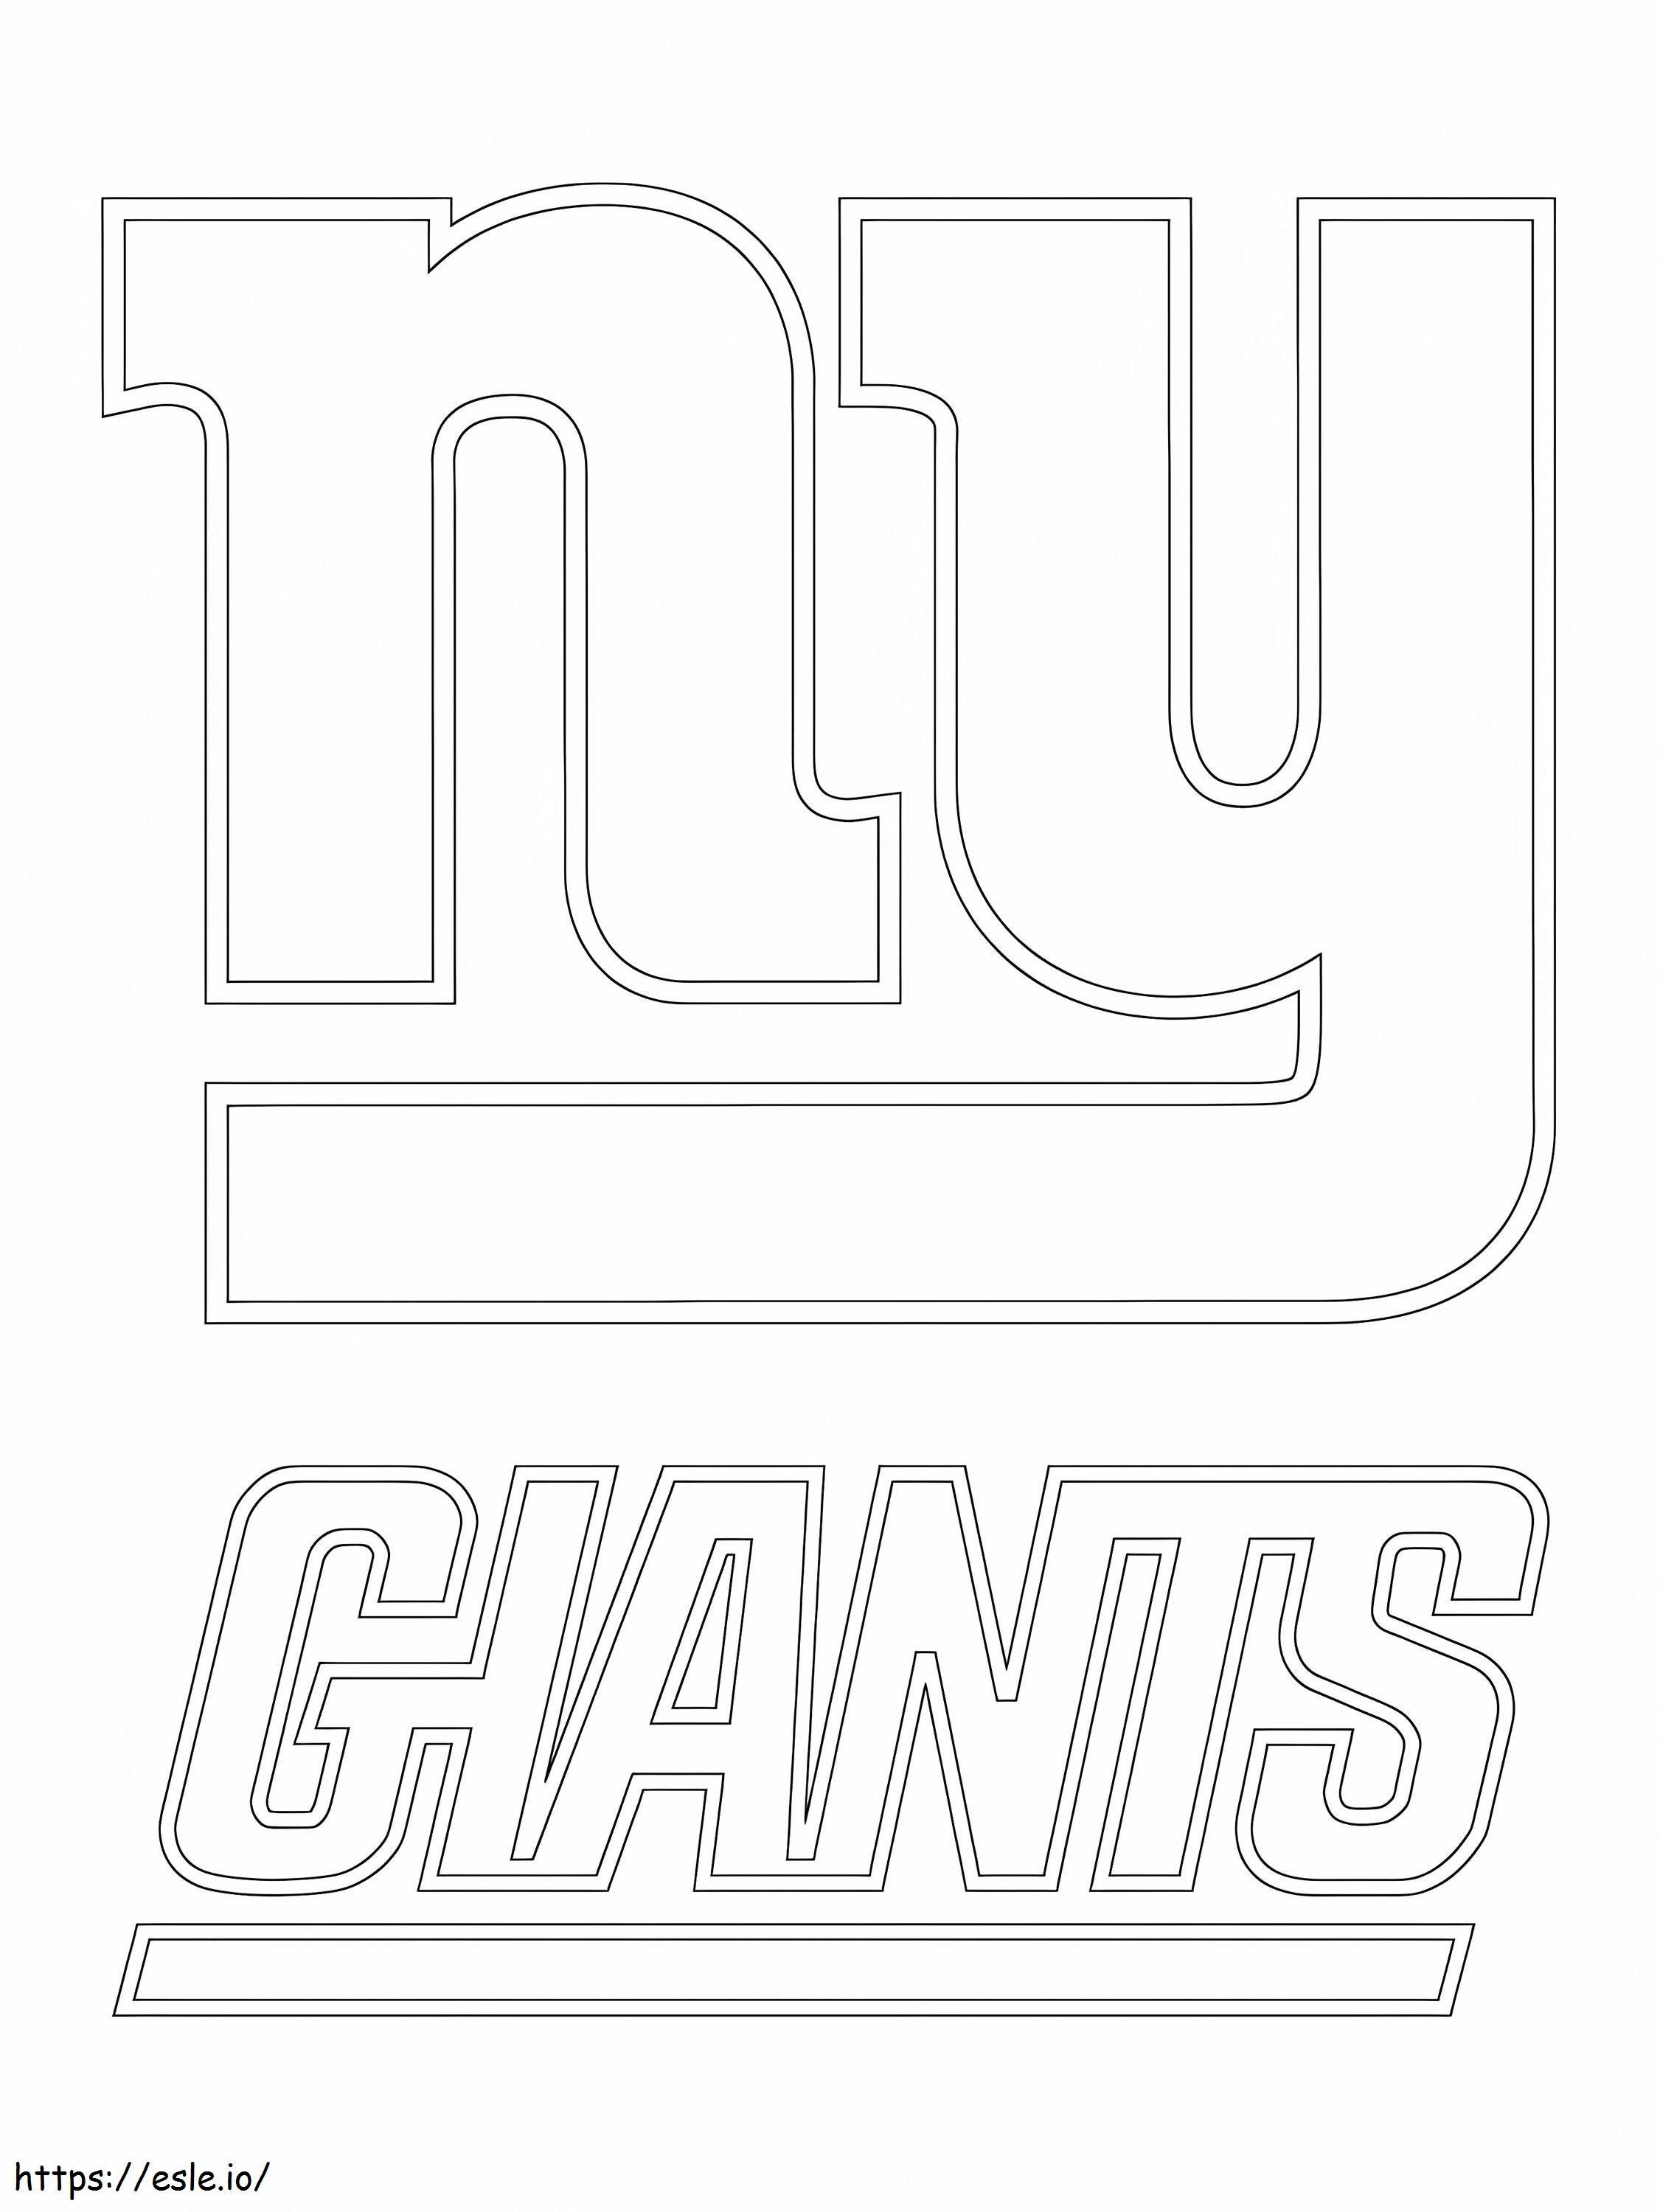 New York Giants Logo coloring page